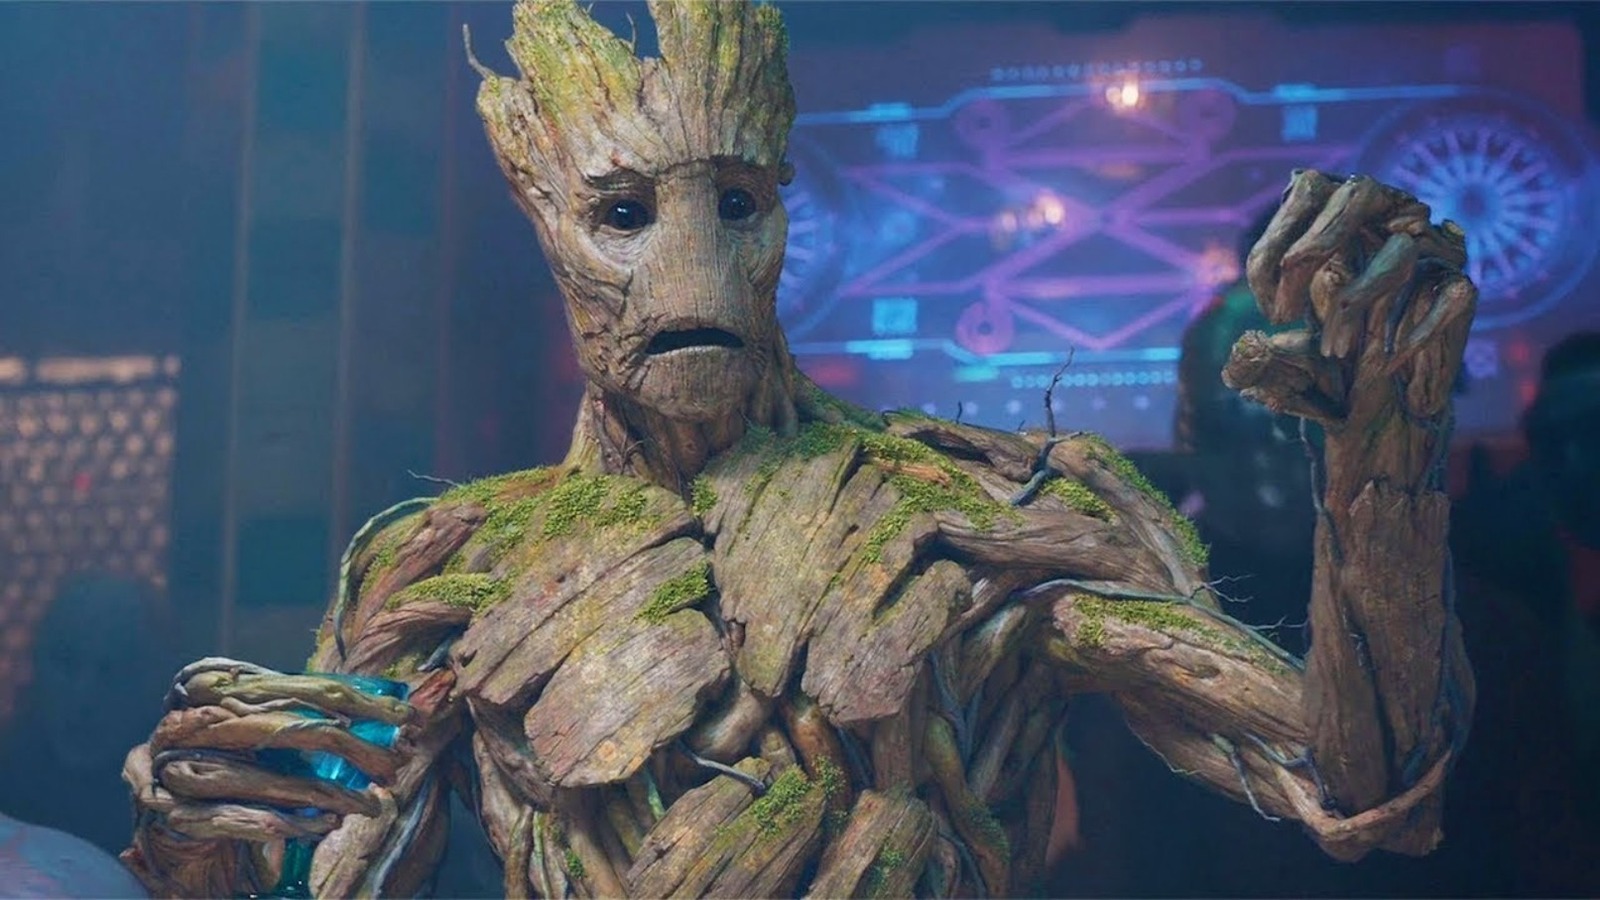 https://www.slashfilm.com/img/gallery/groot-isnt-nearly-as-old-as-he-looks-in-guardians-of-the-galaxy/l-intro-1688139459.jpg